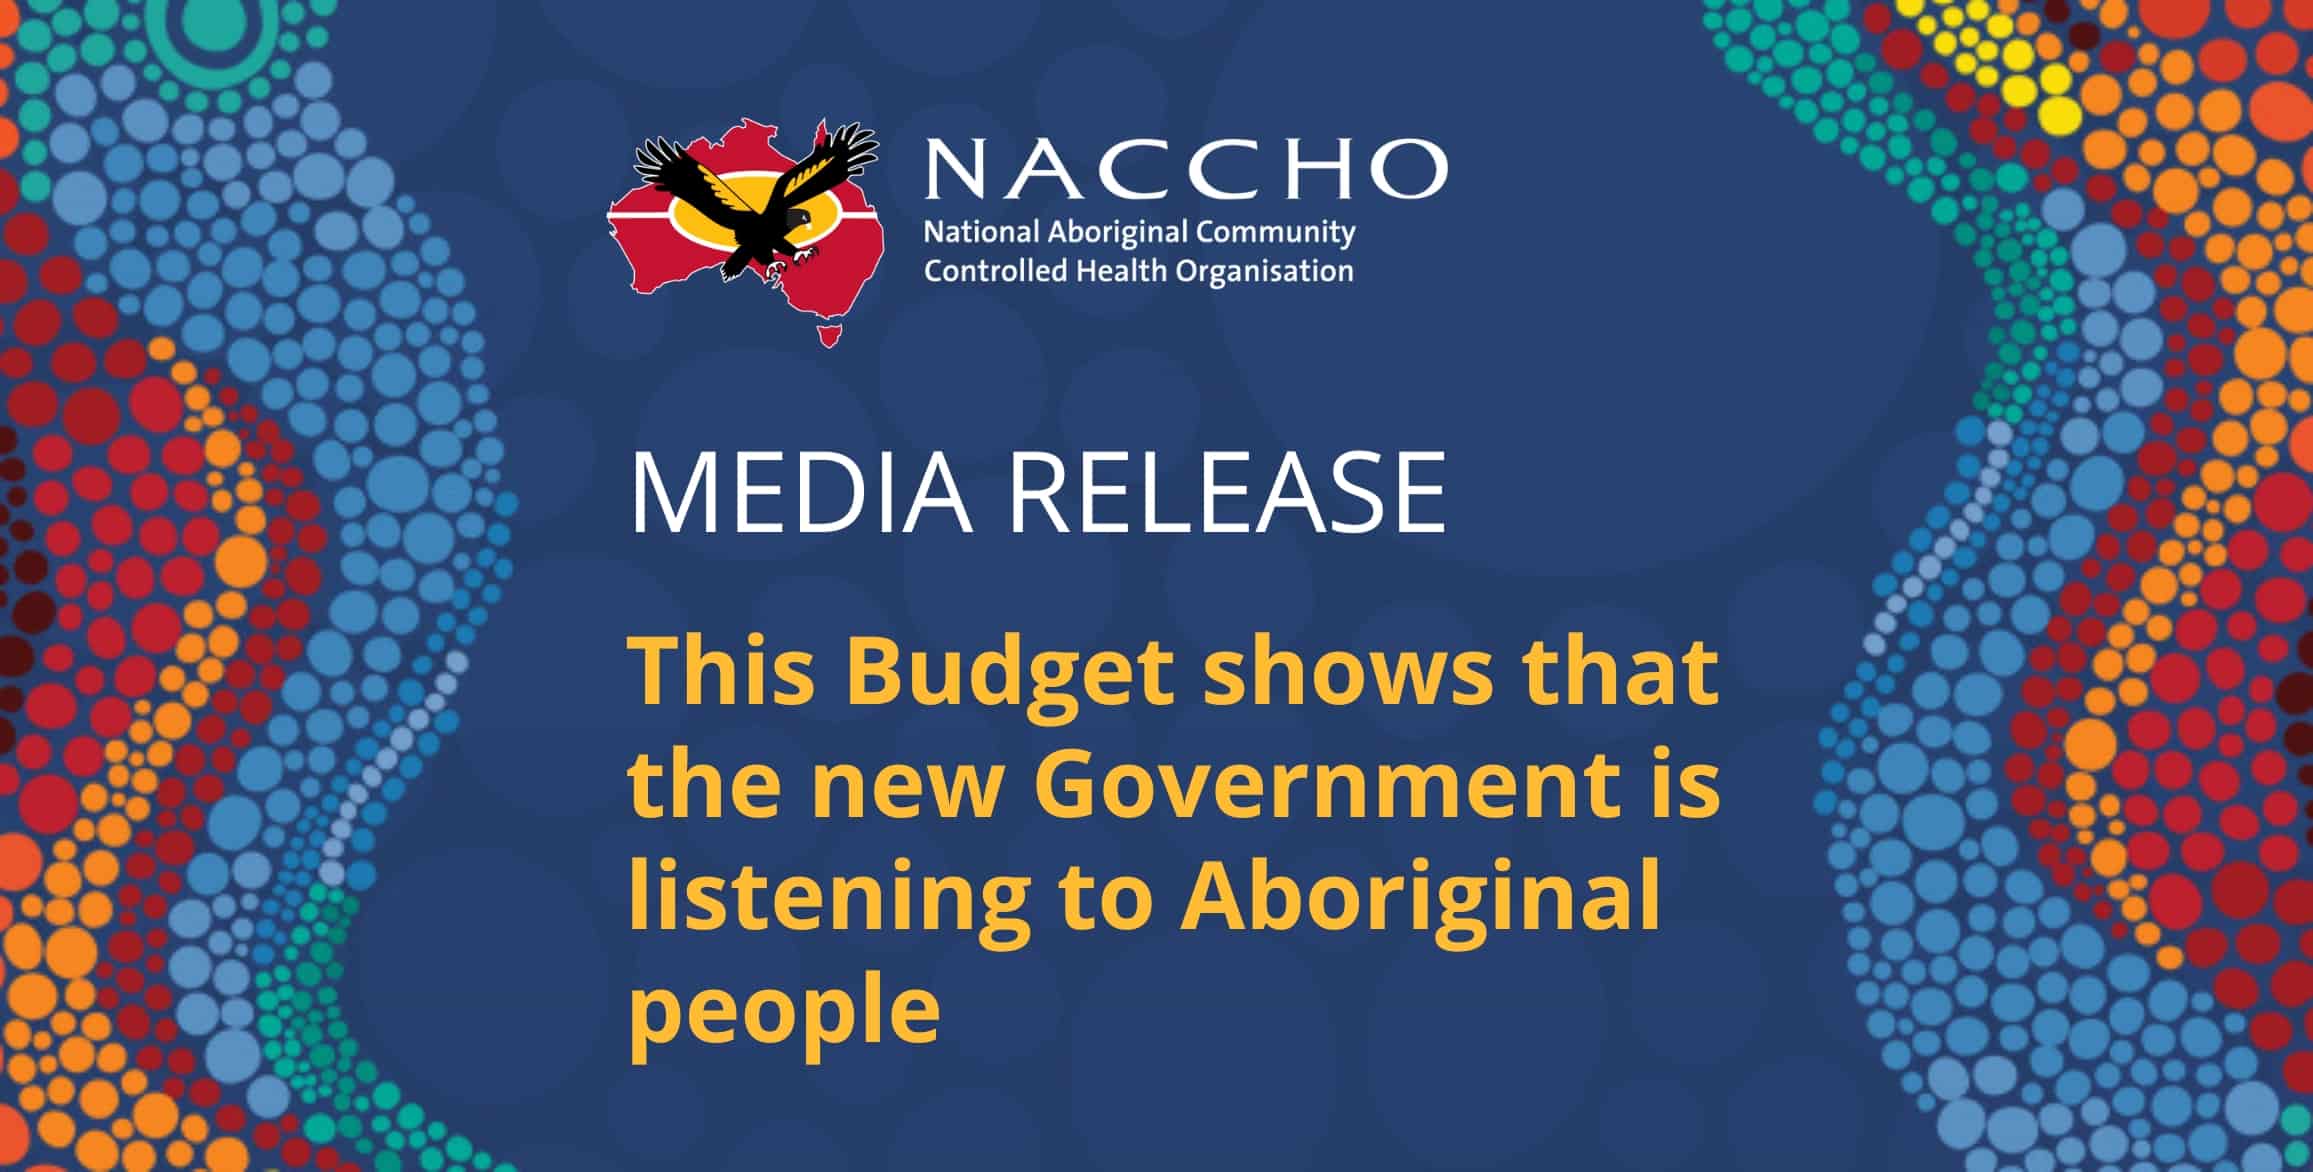 NACCHO Media Release - This Budget shows that the new Government is listening to Aboriginal people